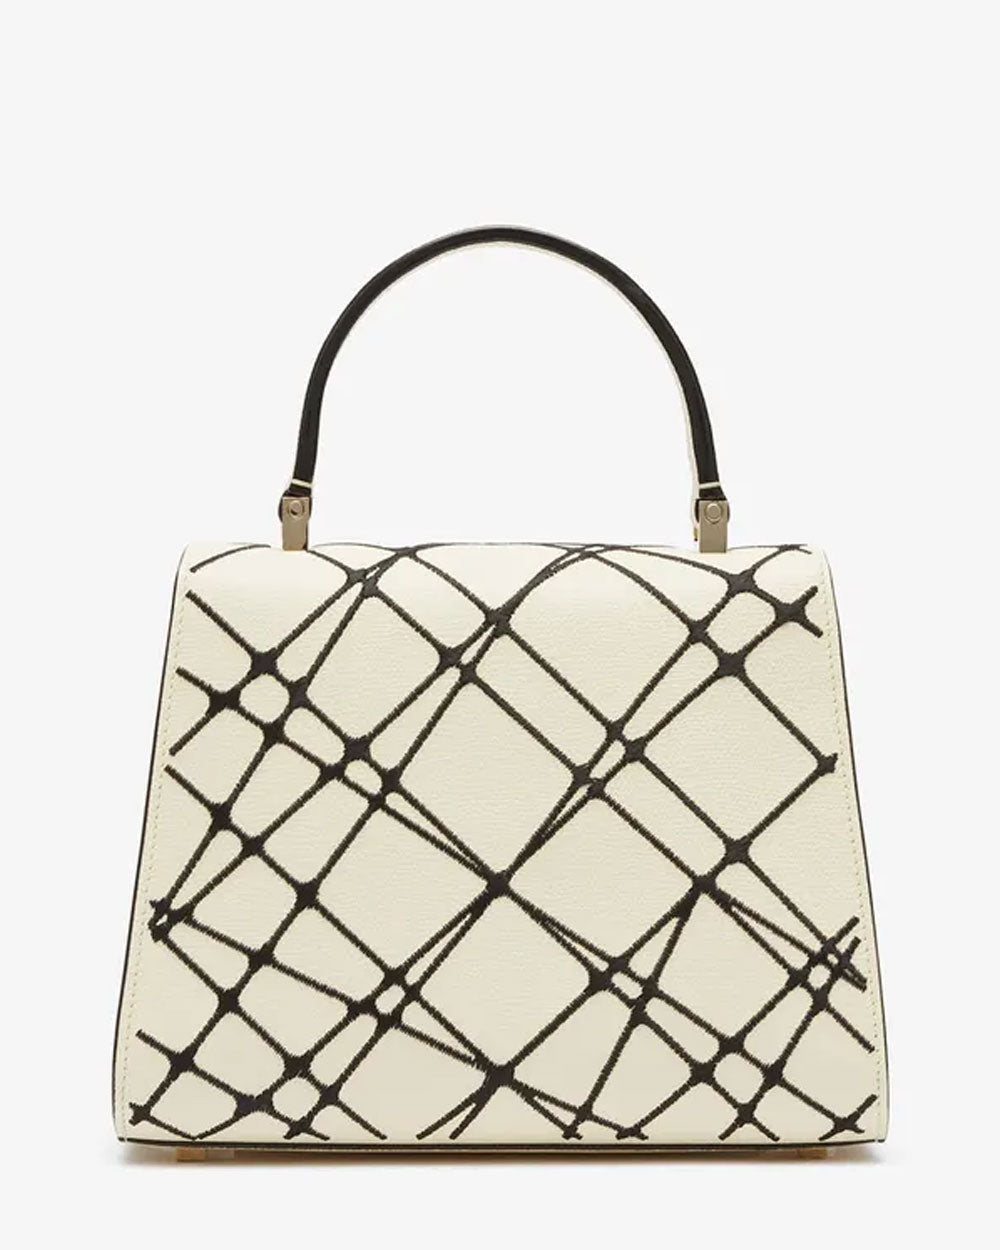 Iside Embroidery Weave Top Handle Mini Bag in Pegra and Nero